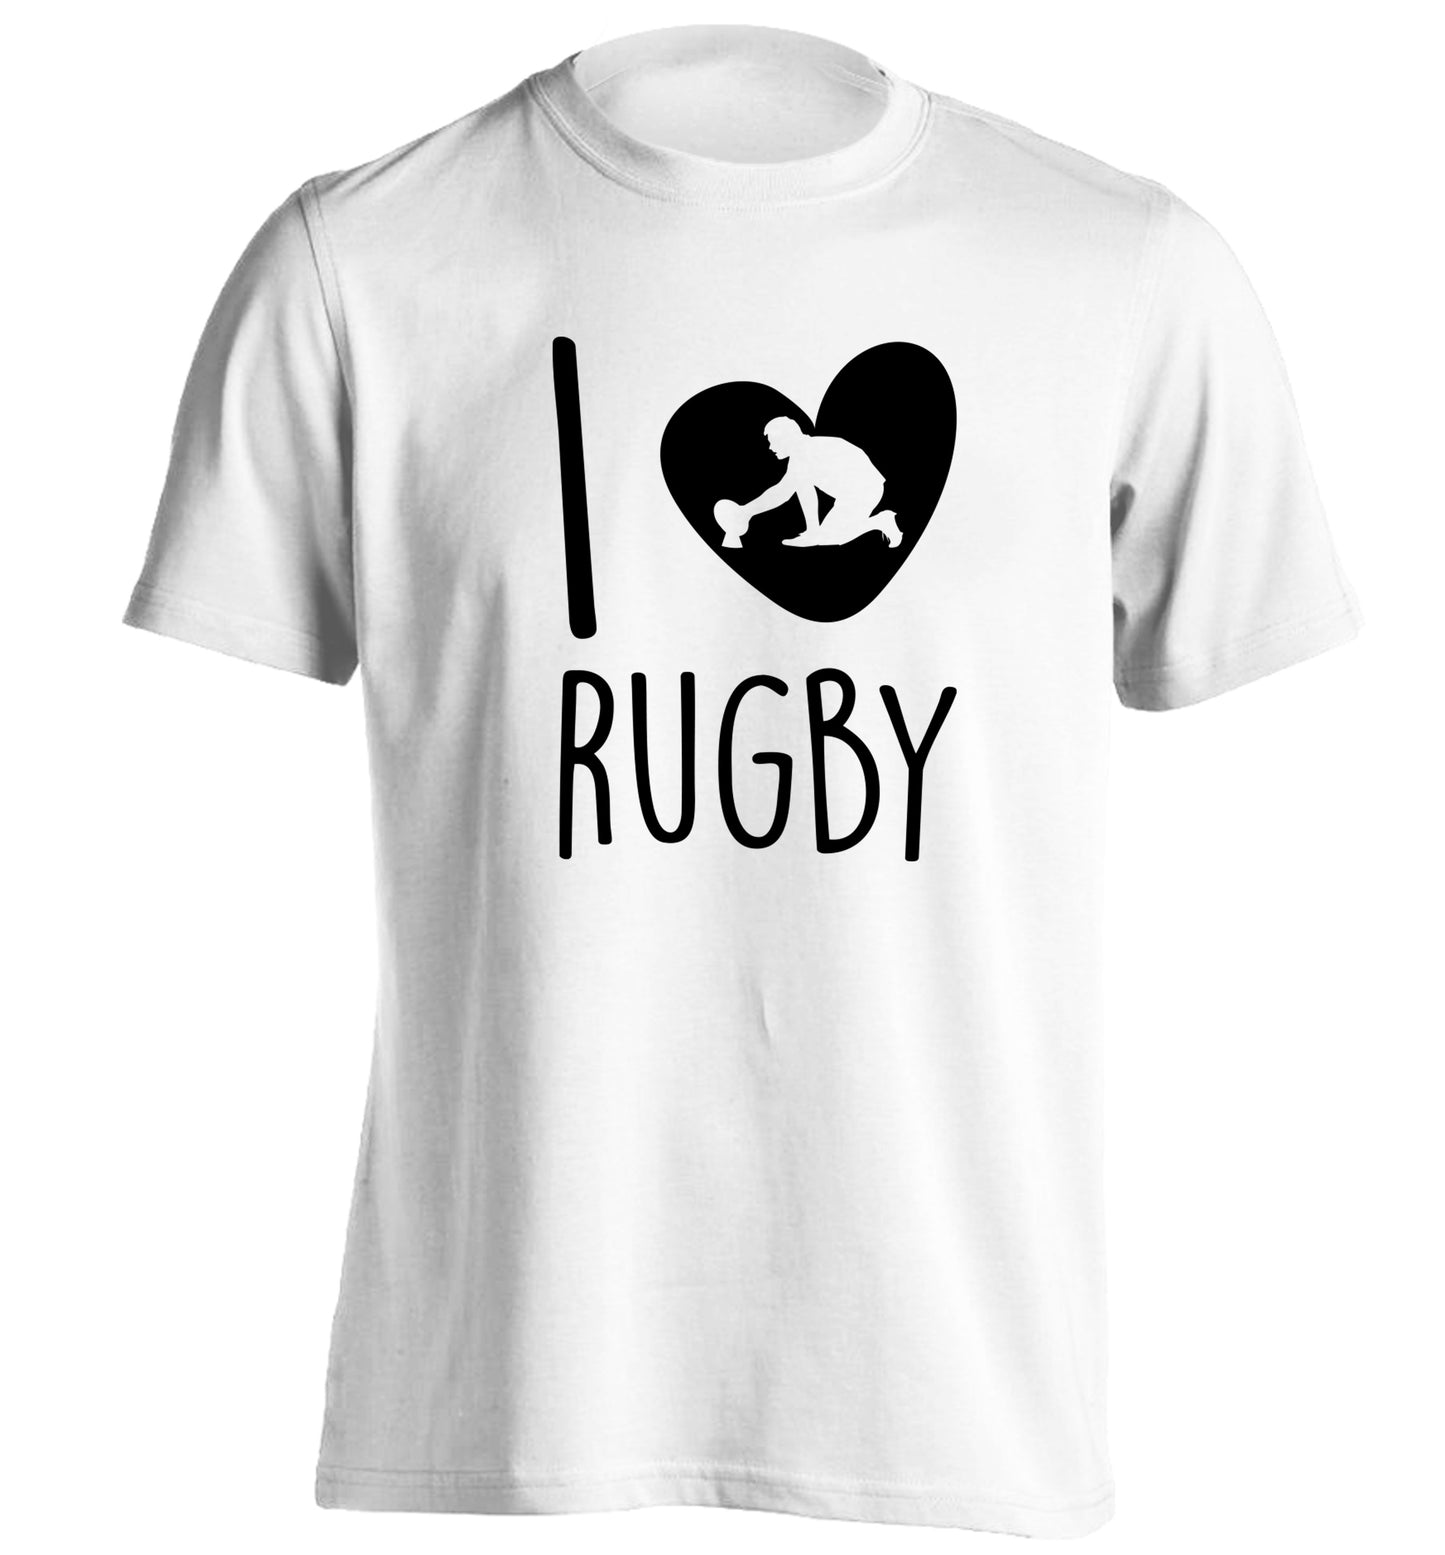 I love rugby adults unisex white Tshirt 2XL